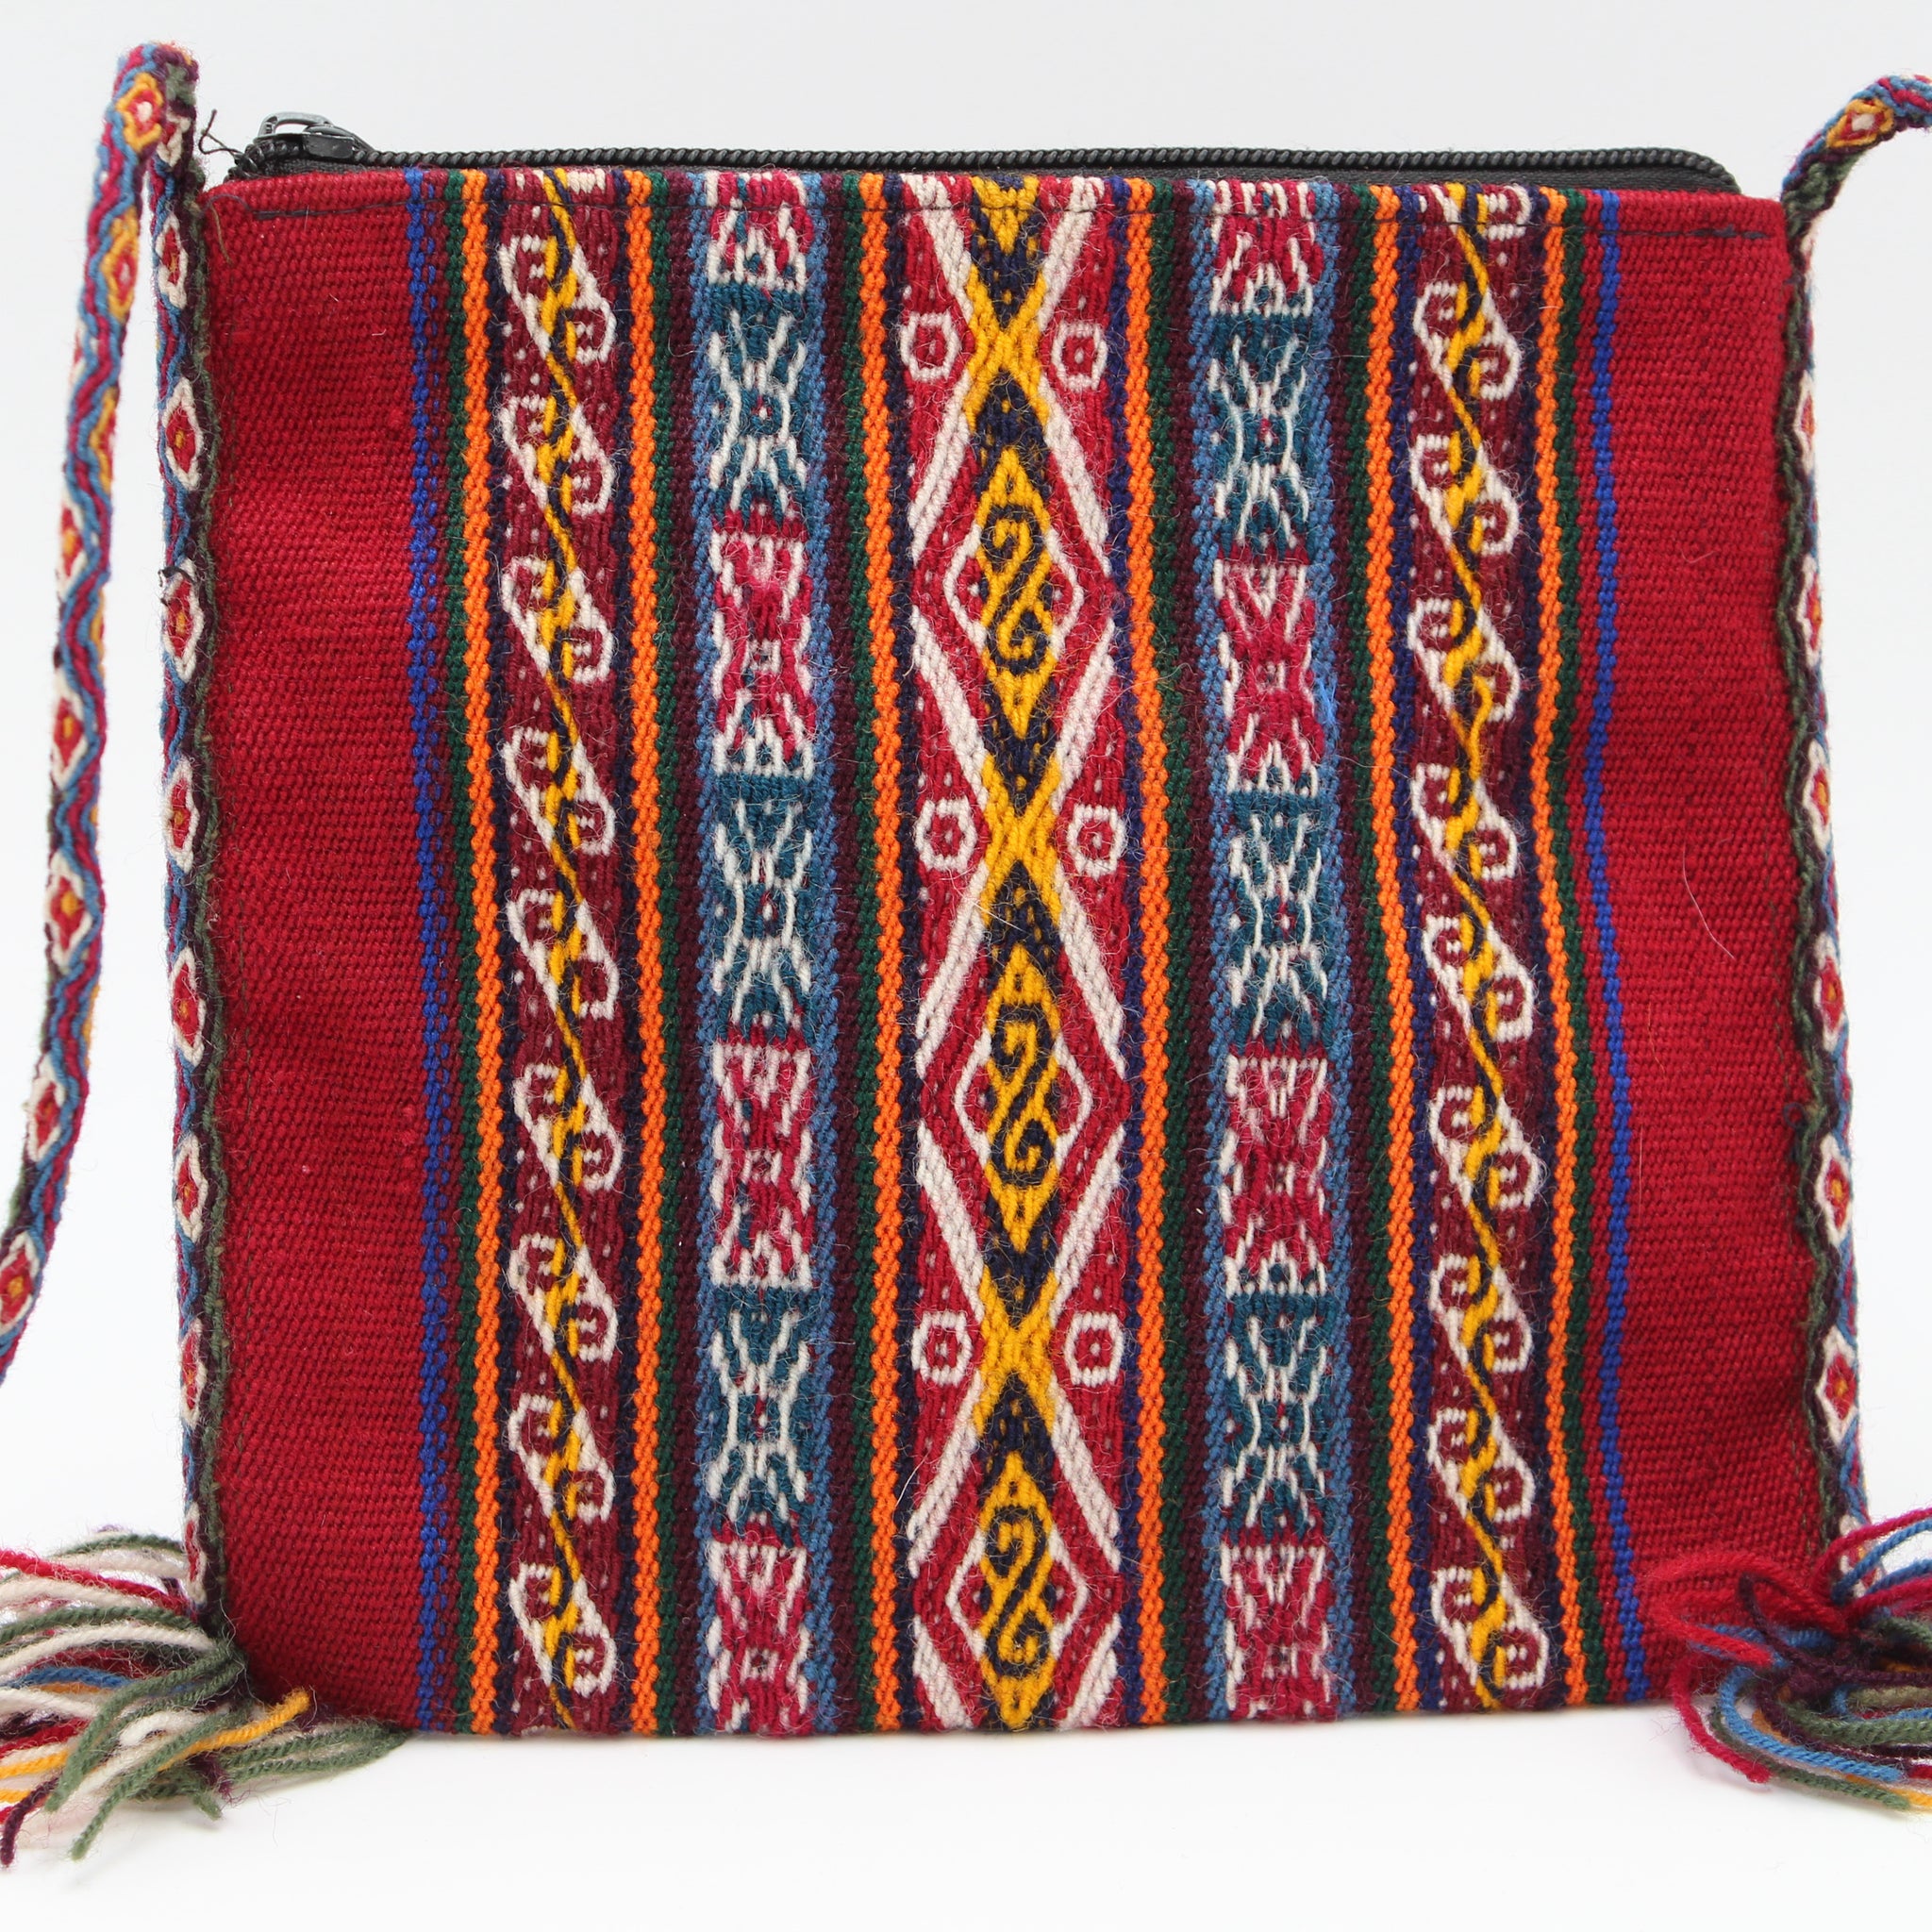 Small Chuspa Crossbody - Red with Multicolor patterns and braided strap